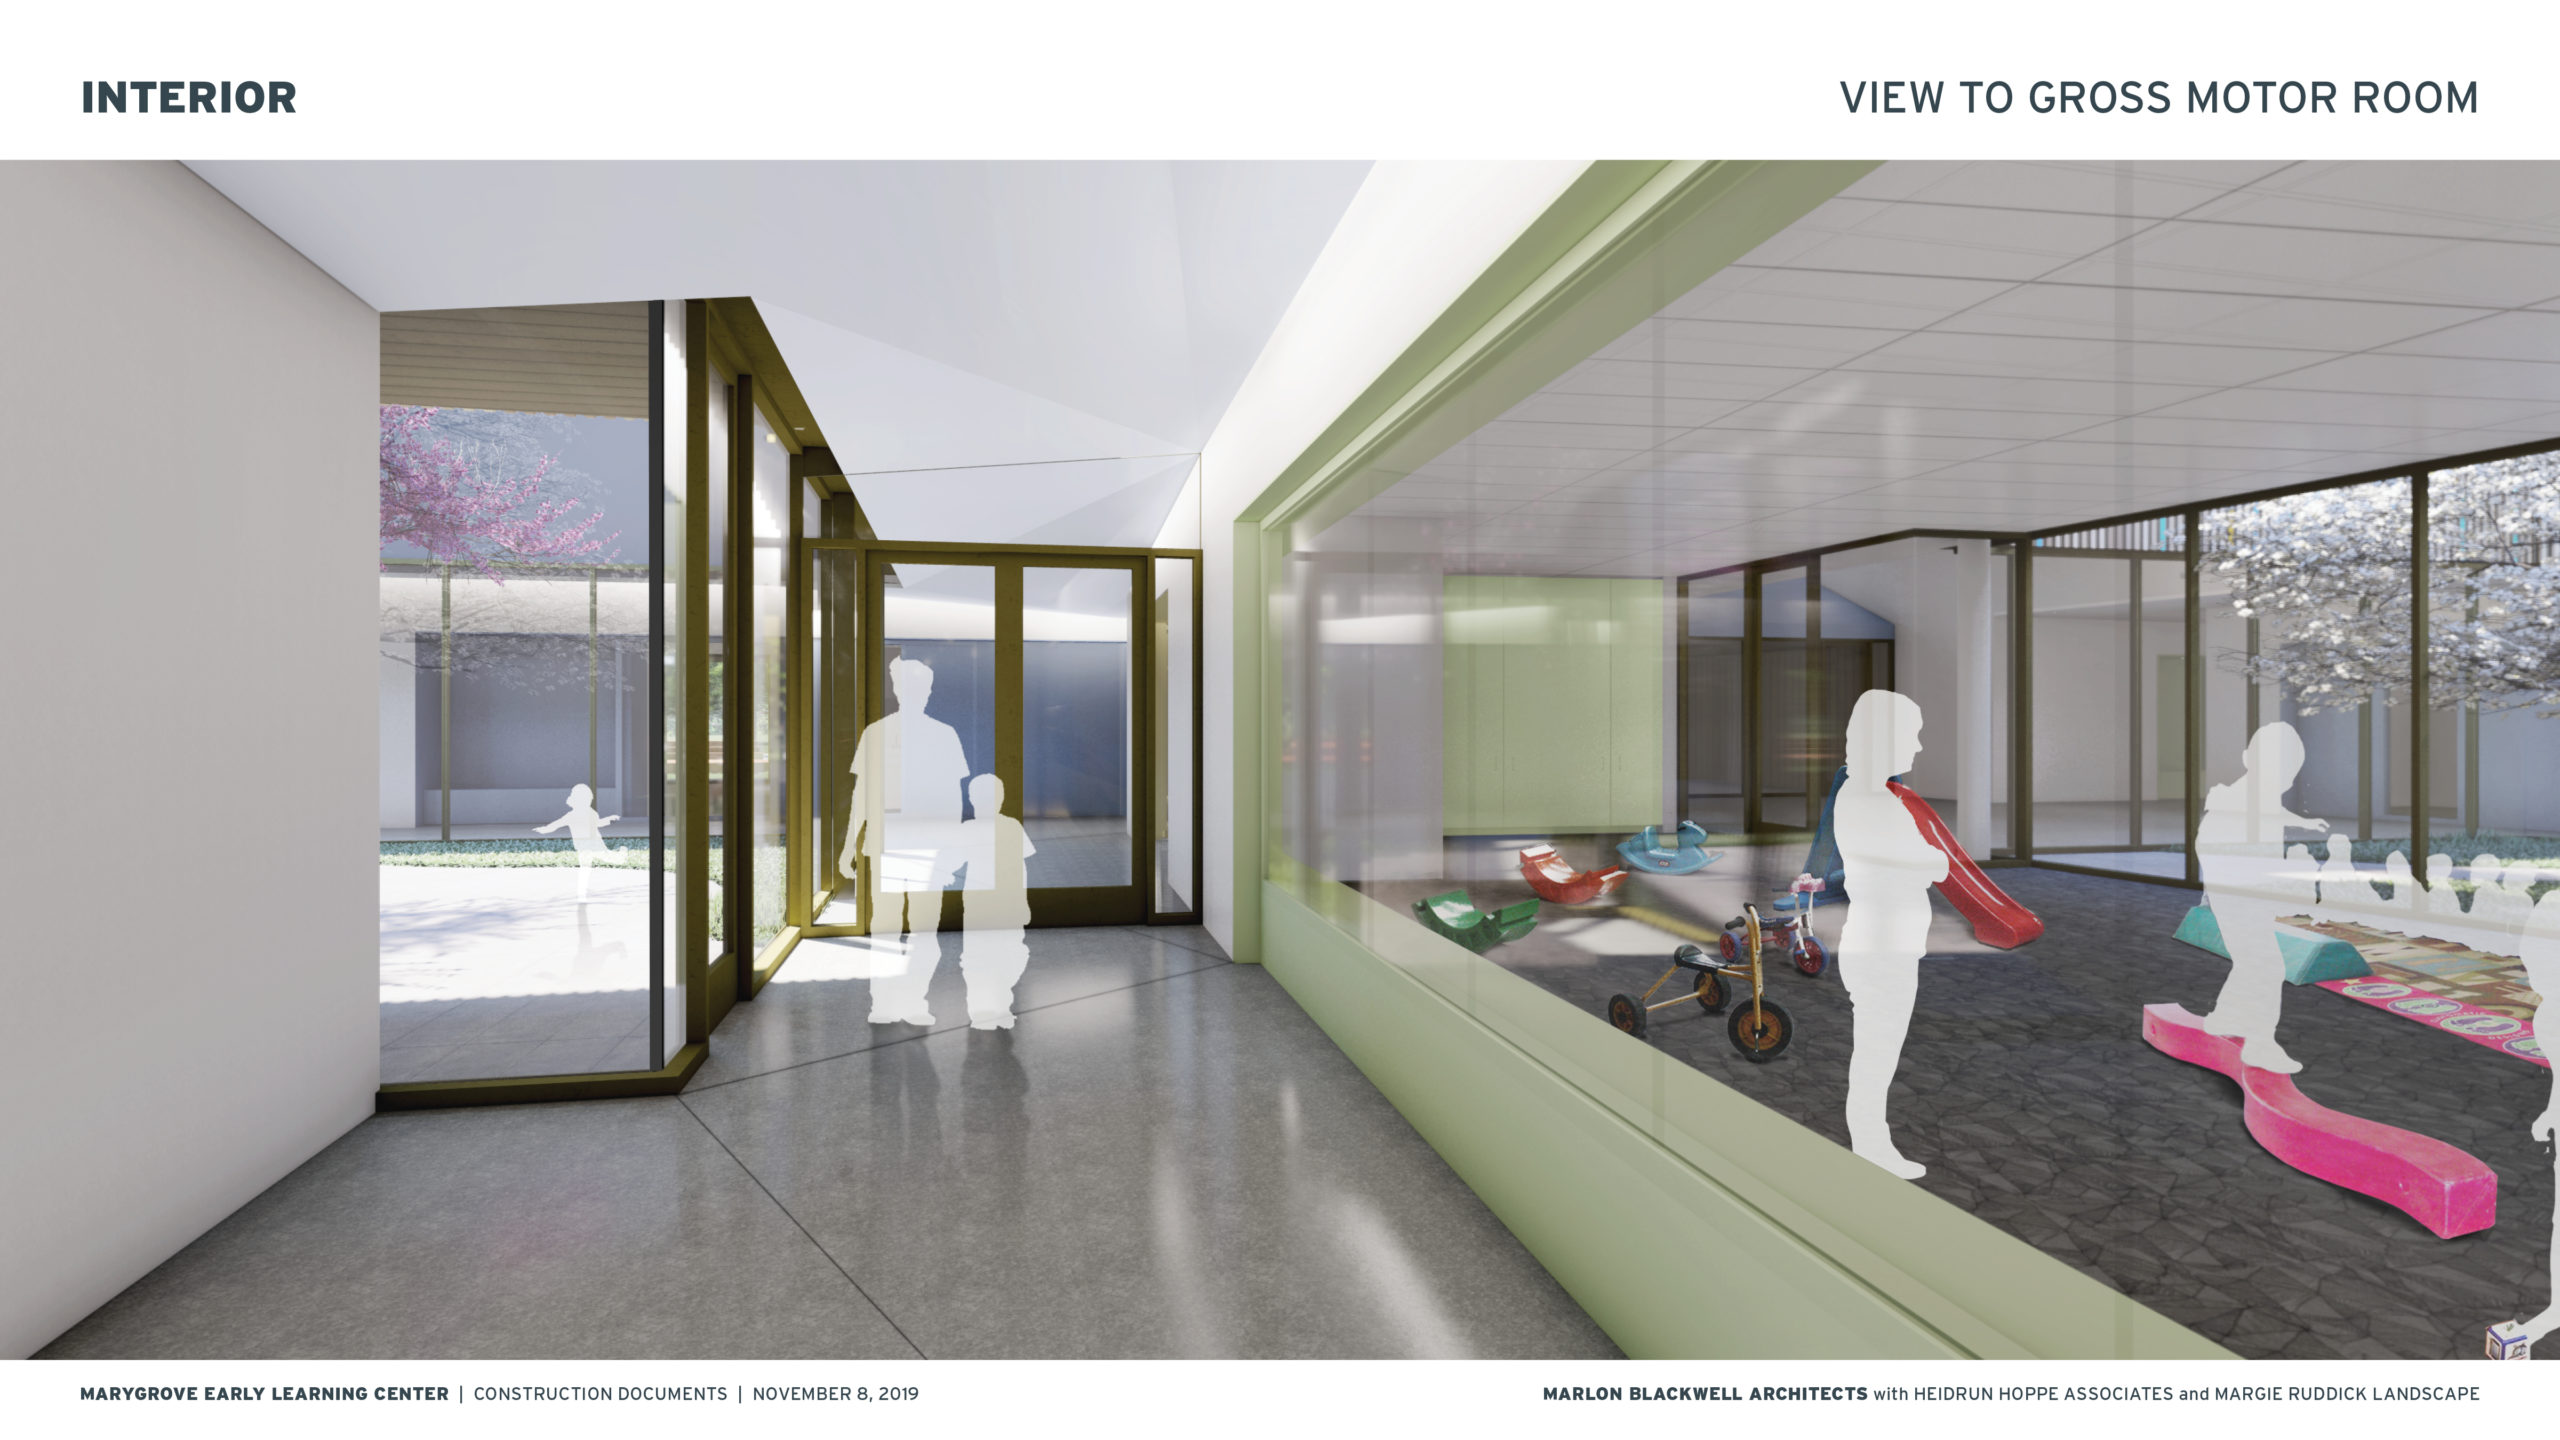 Interior rendering of Early Childhood Education center on Marygrove campus